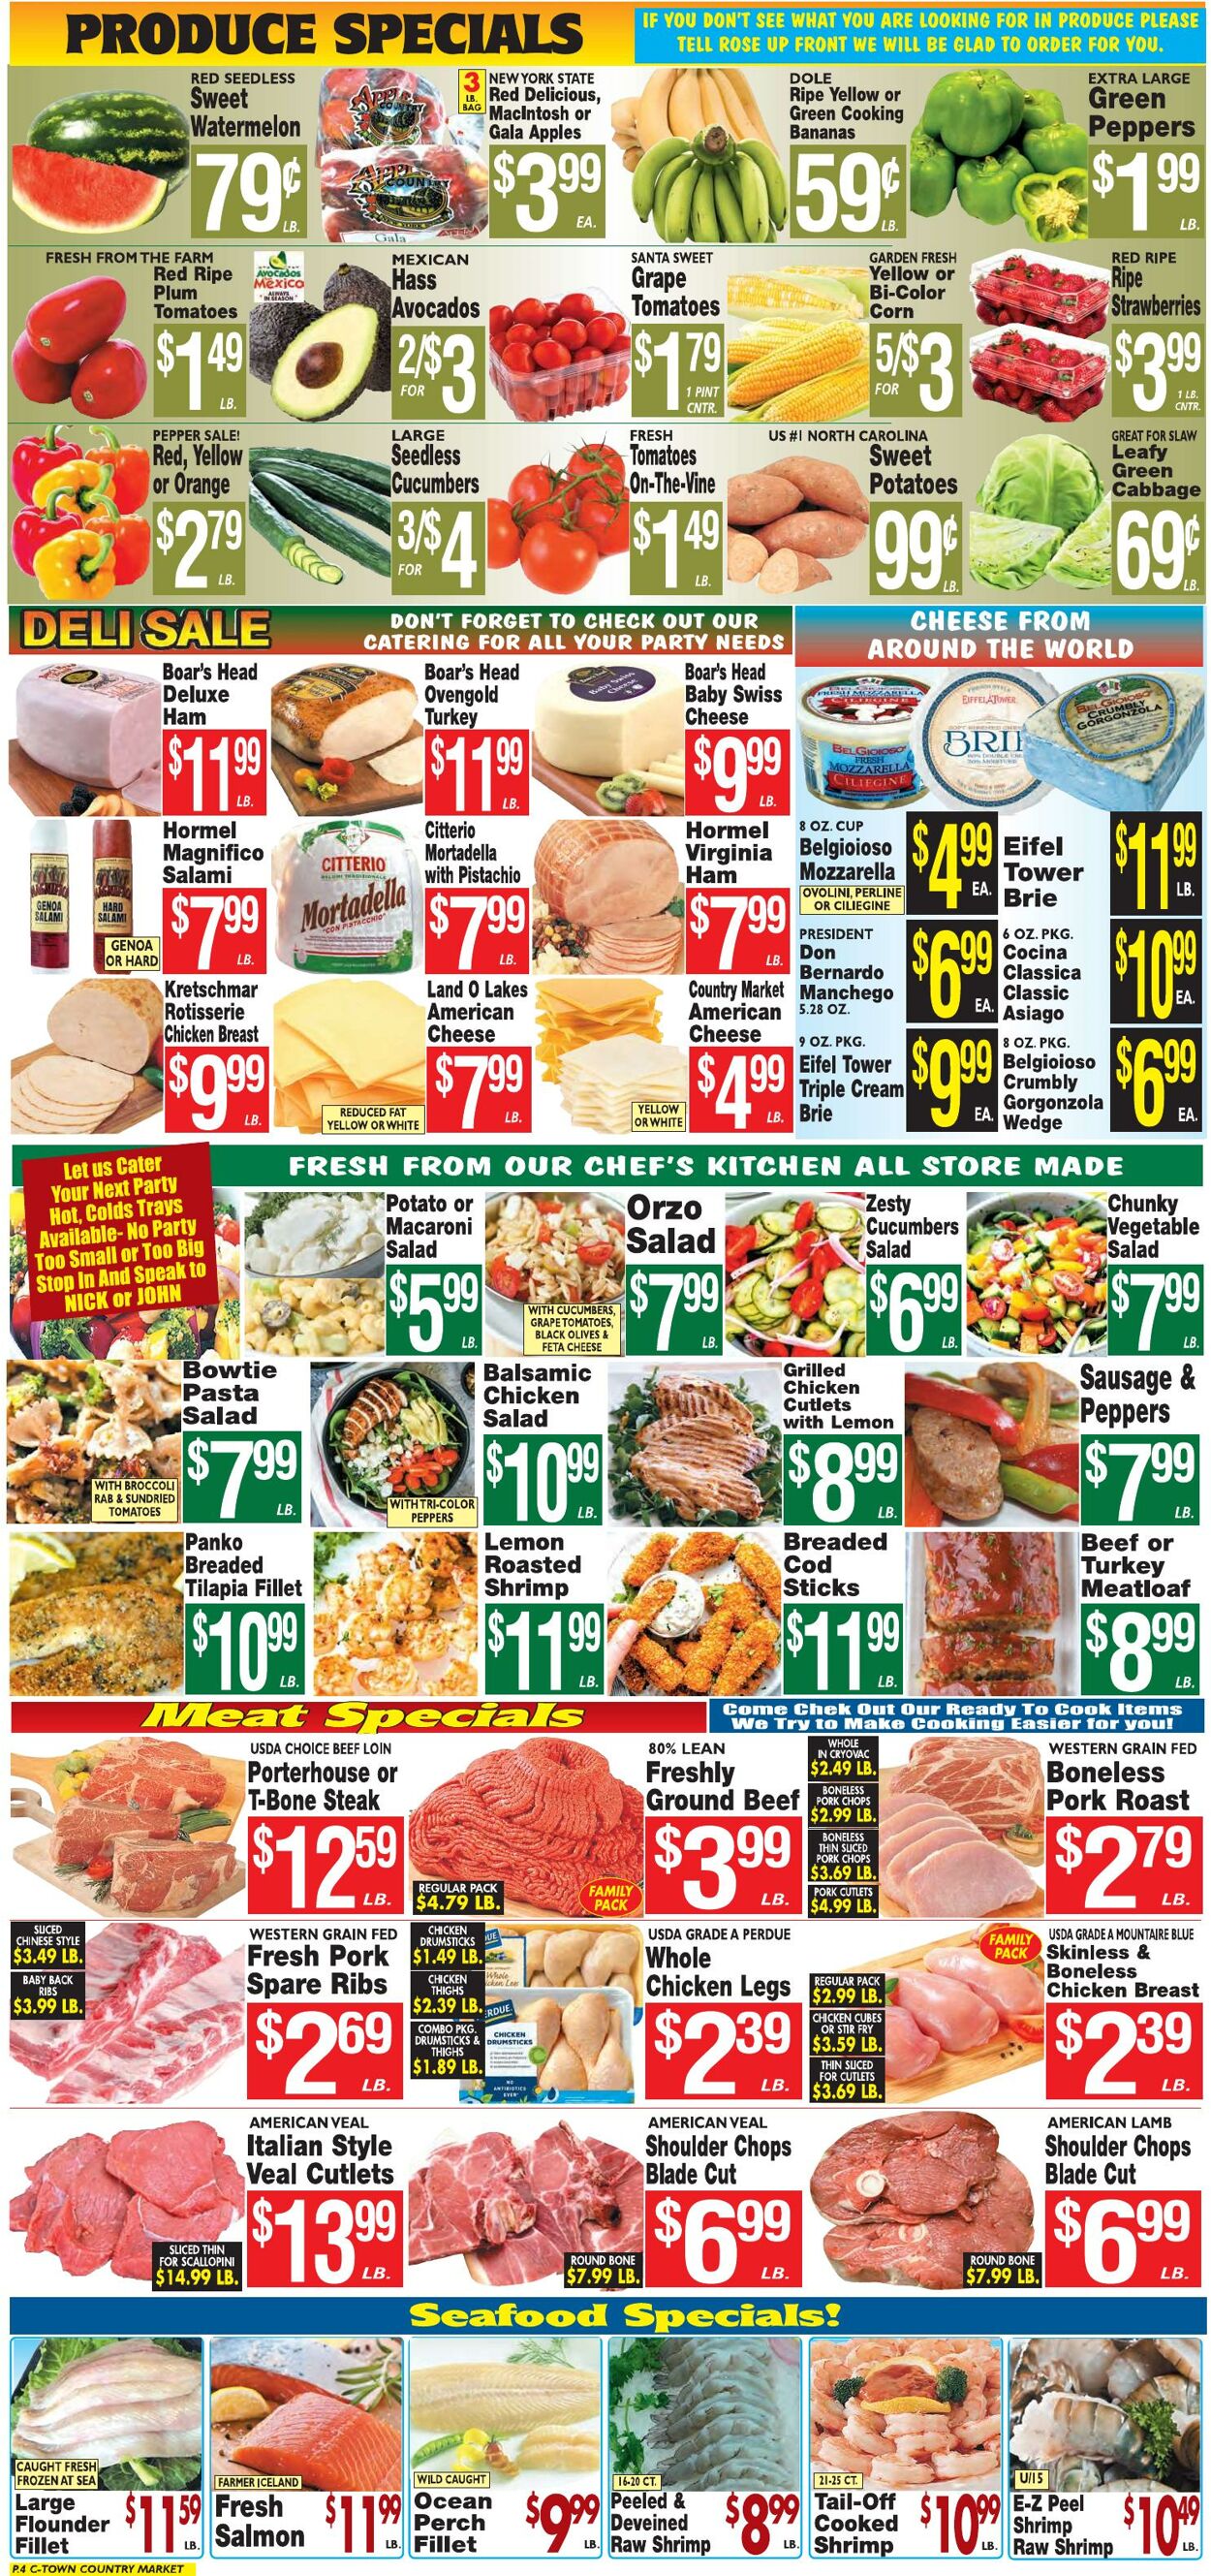 Weekly ad Country Markets of Westchester 05/12/2023 - 05/25/2023